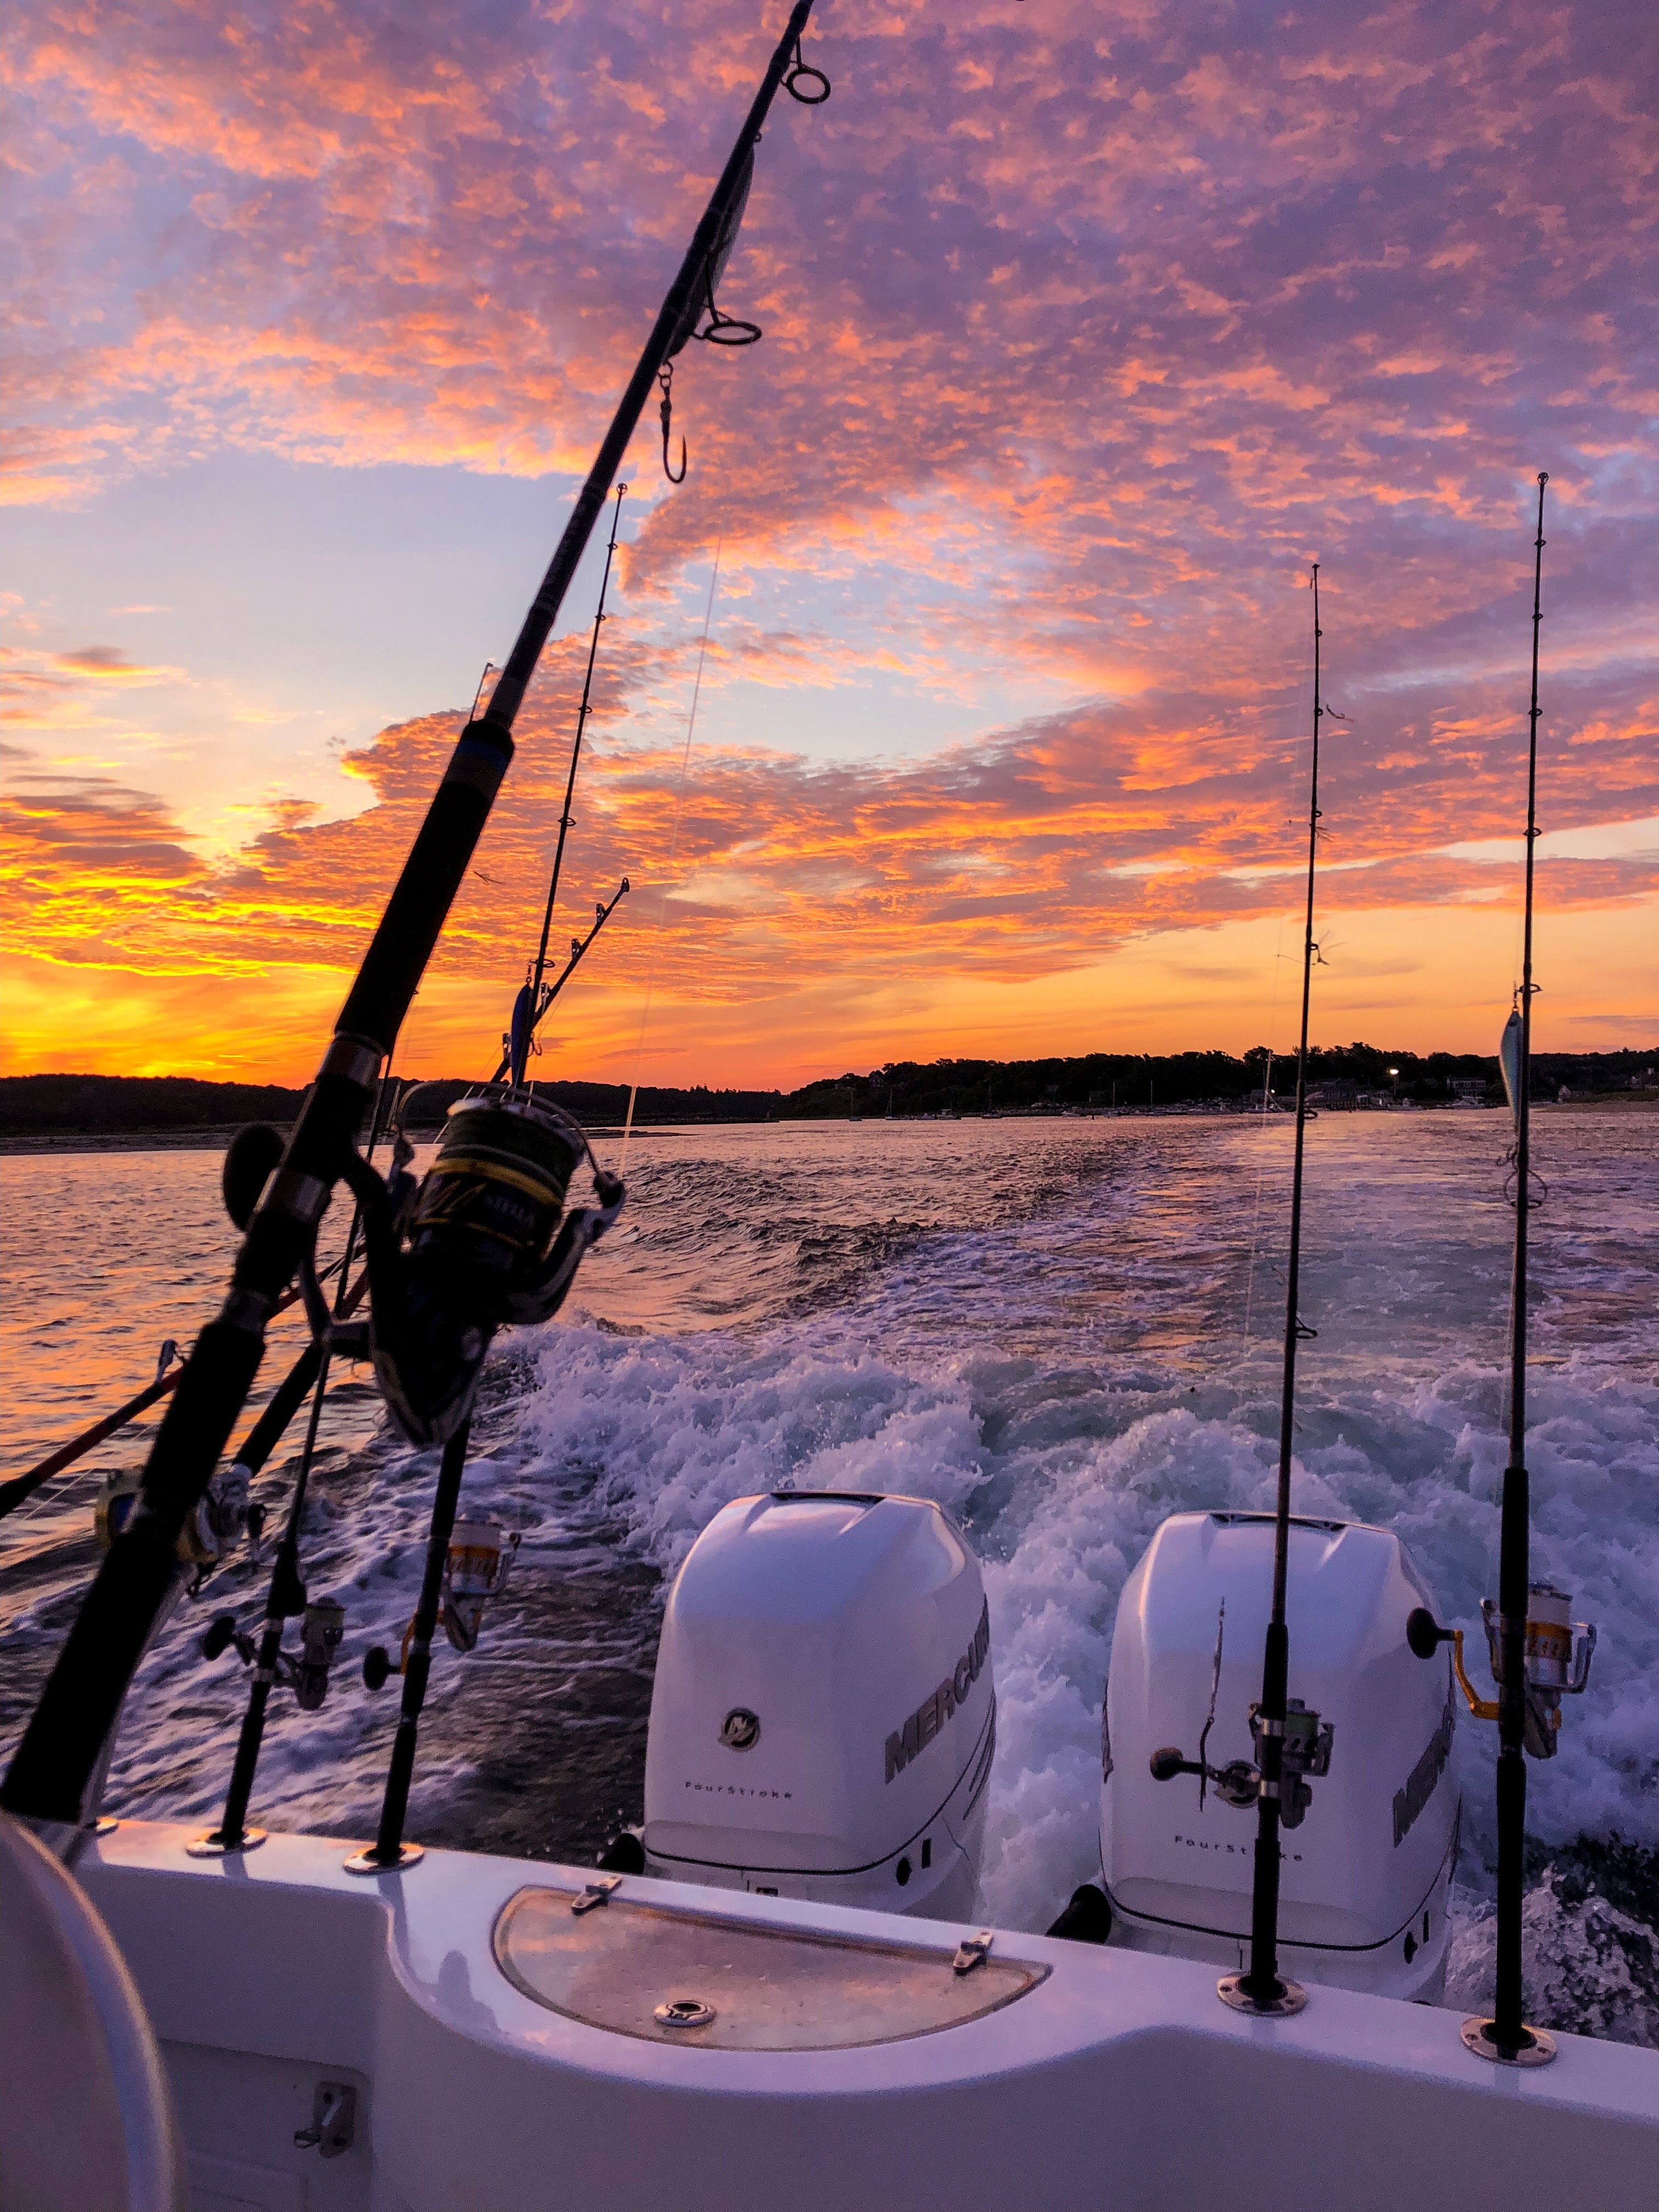 The Best Tuna Jigging Rods and Reels for Offhore Boat Anglers